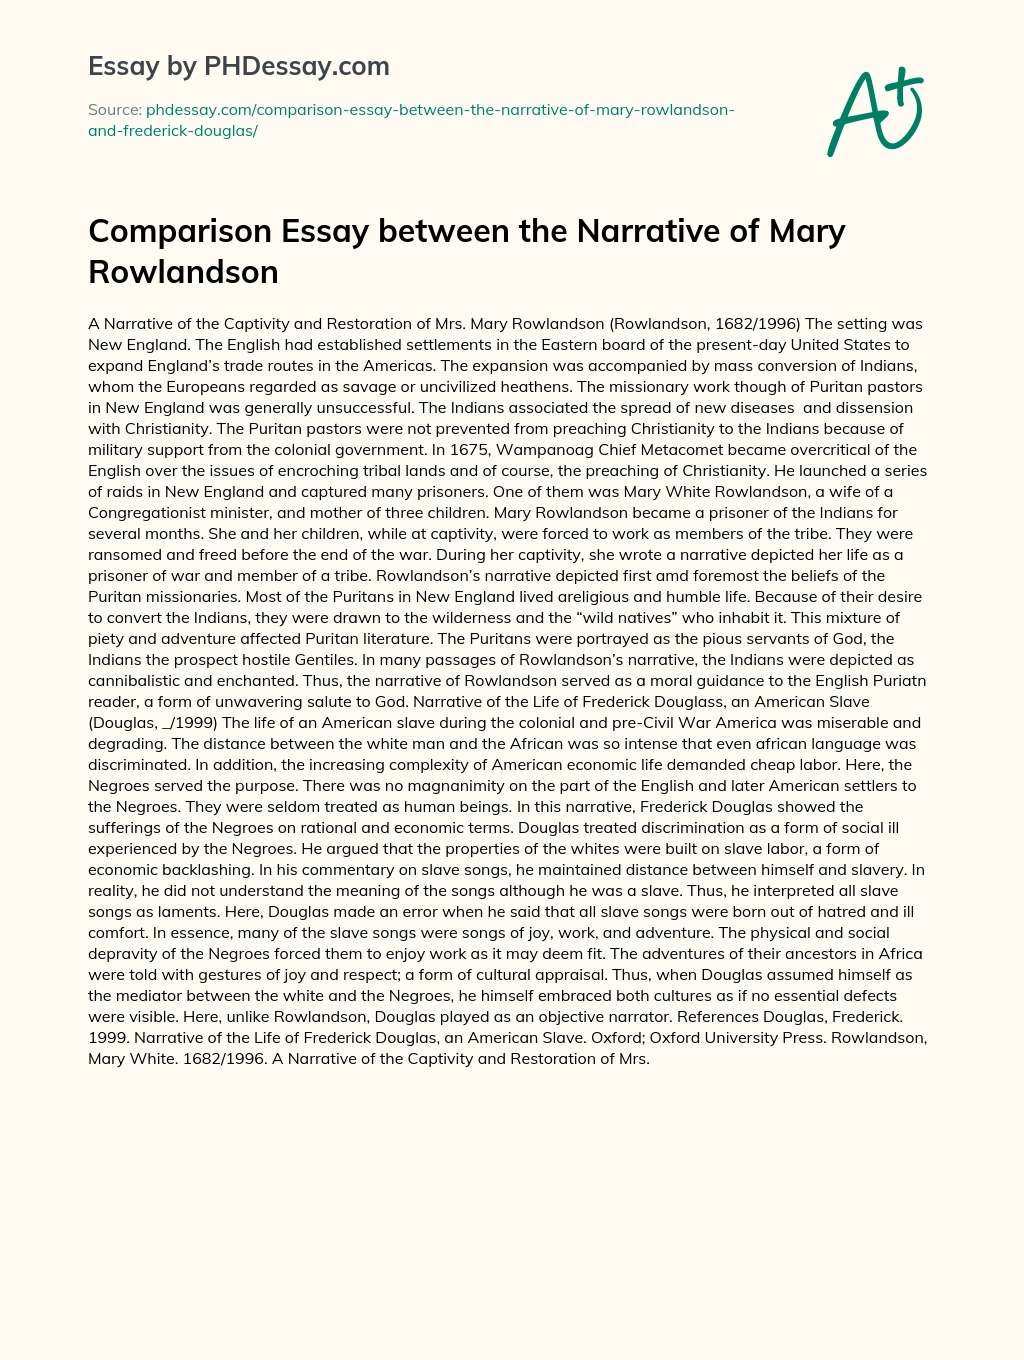 Comparison Essay between the Narrative of Mary Rowlandson essay